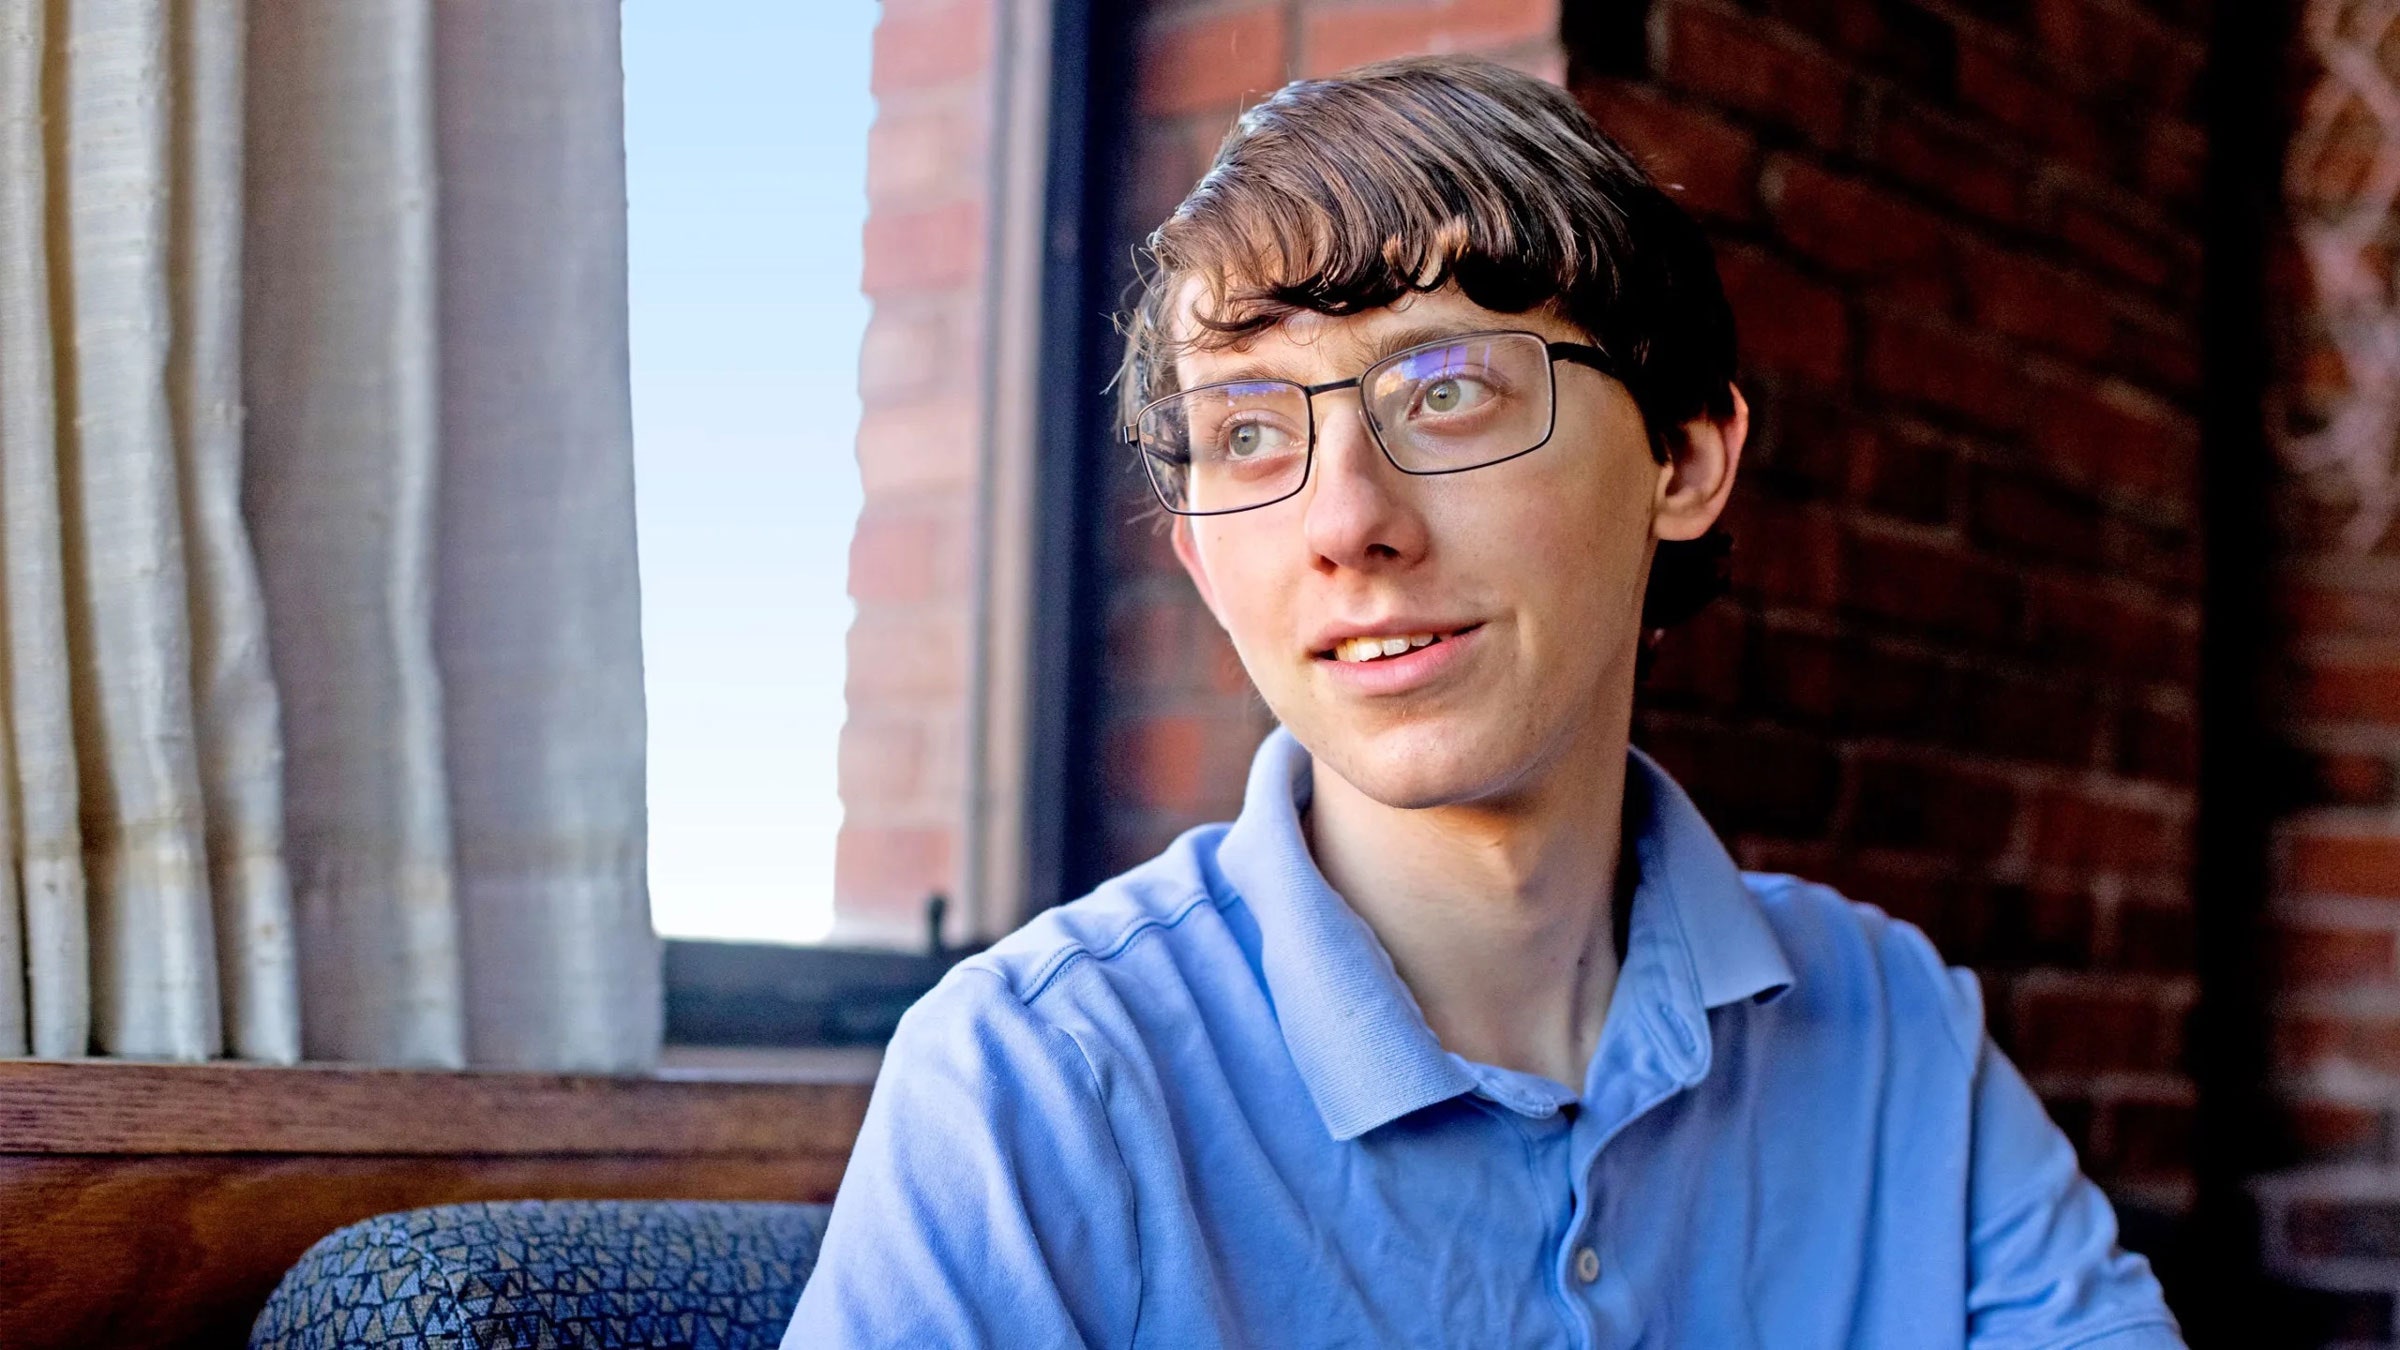 A Teenager Solved a Stubborn Prime Number 'Look-Alike' Riddle | WIRED